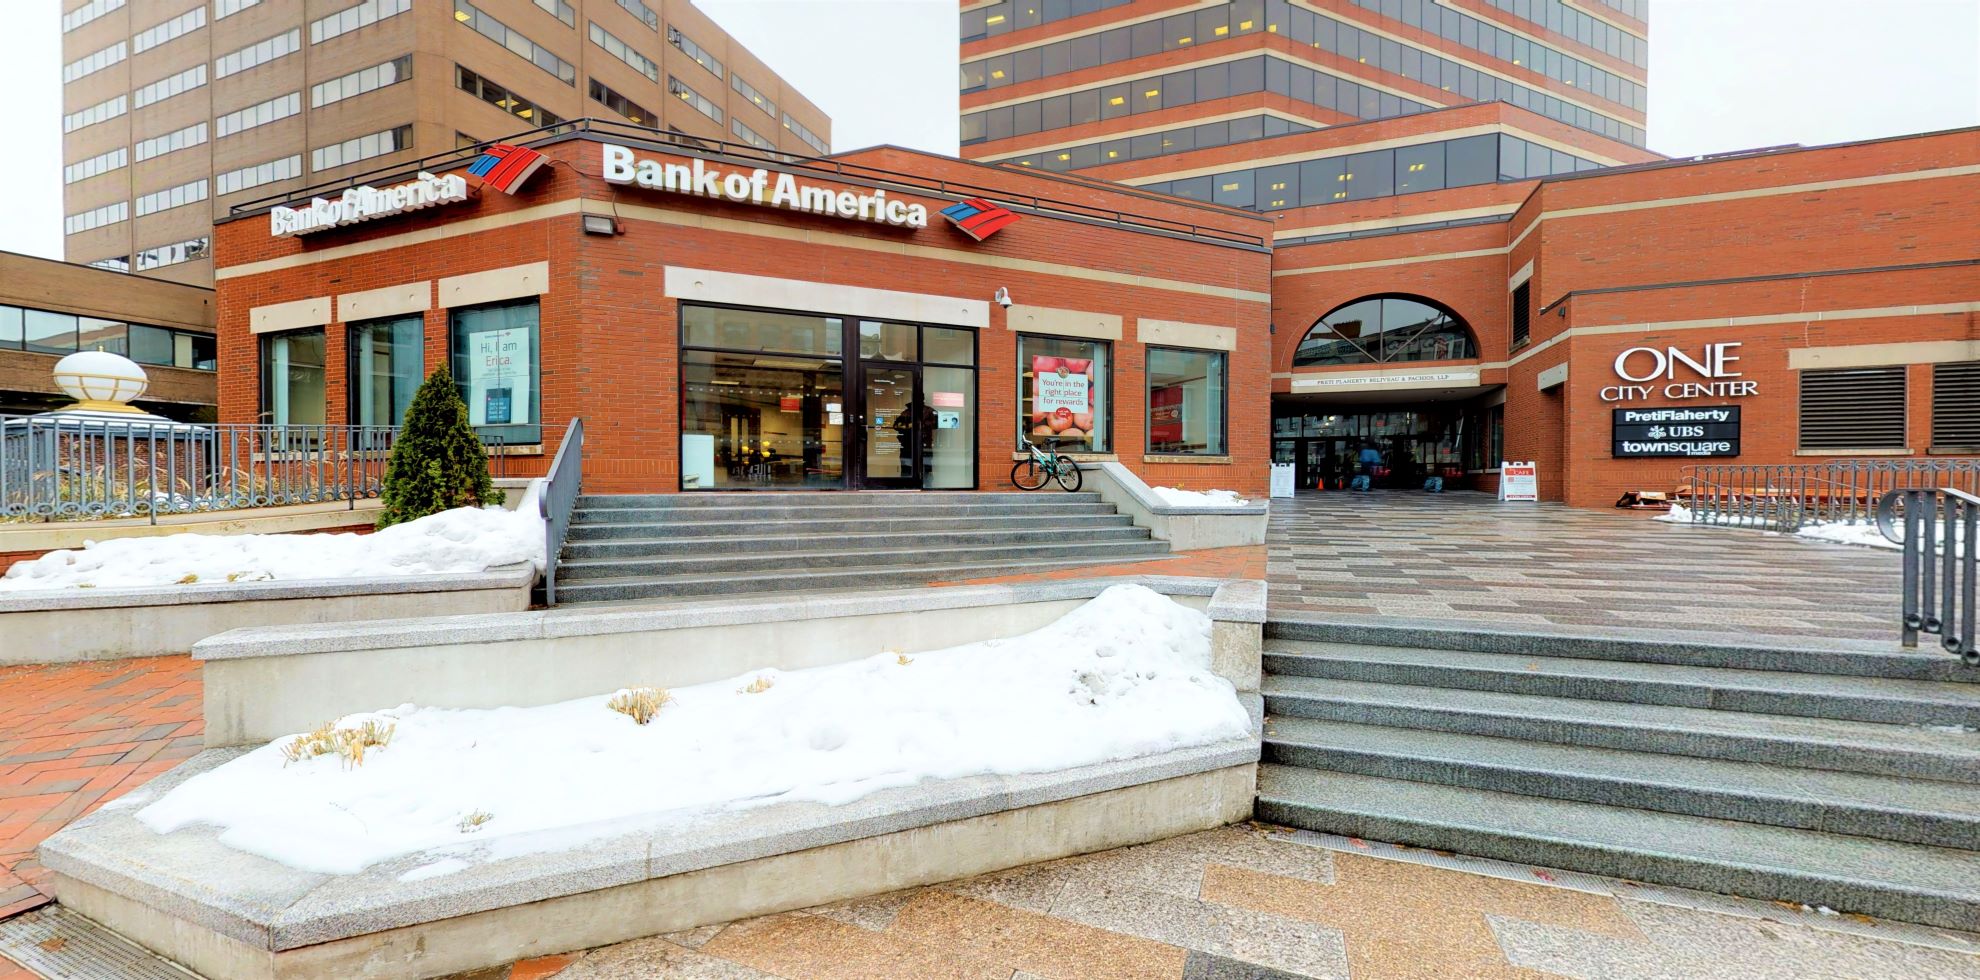 Bank of America financial center with walk-up ATM | 1 City Ctr, Portland, ME 04101